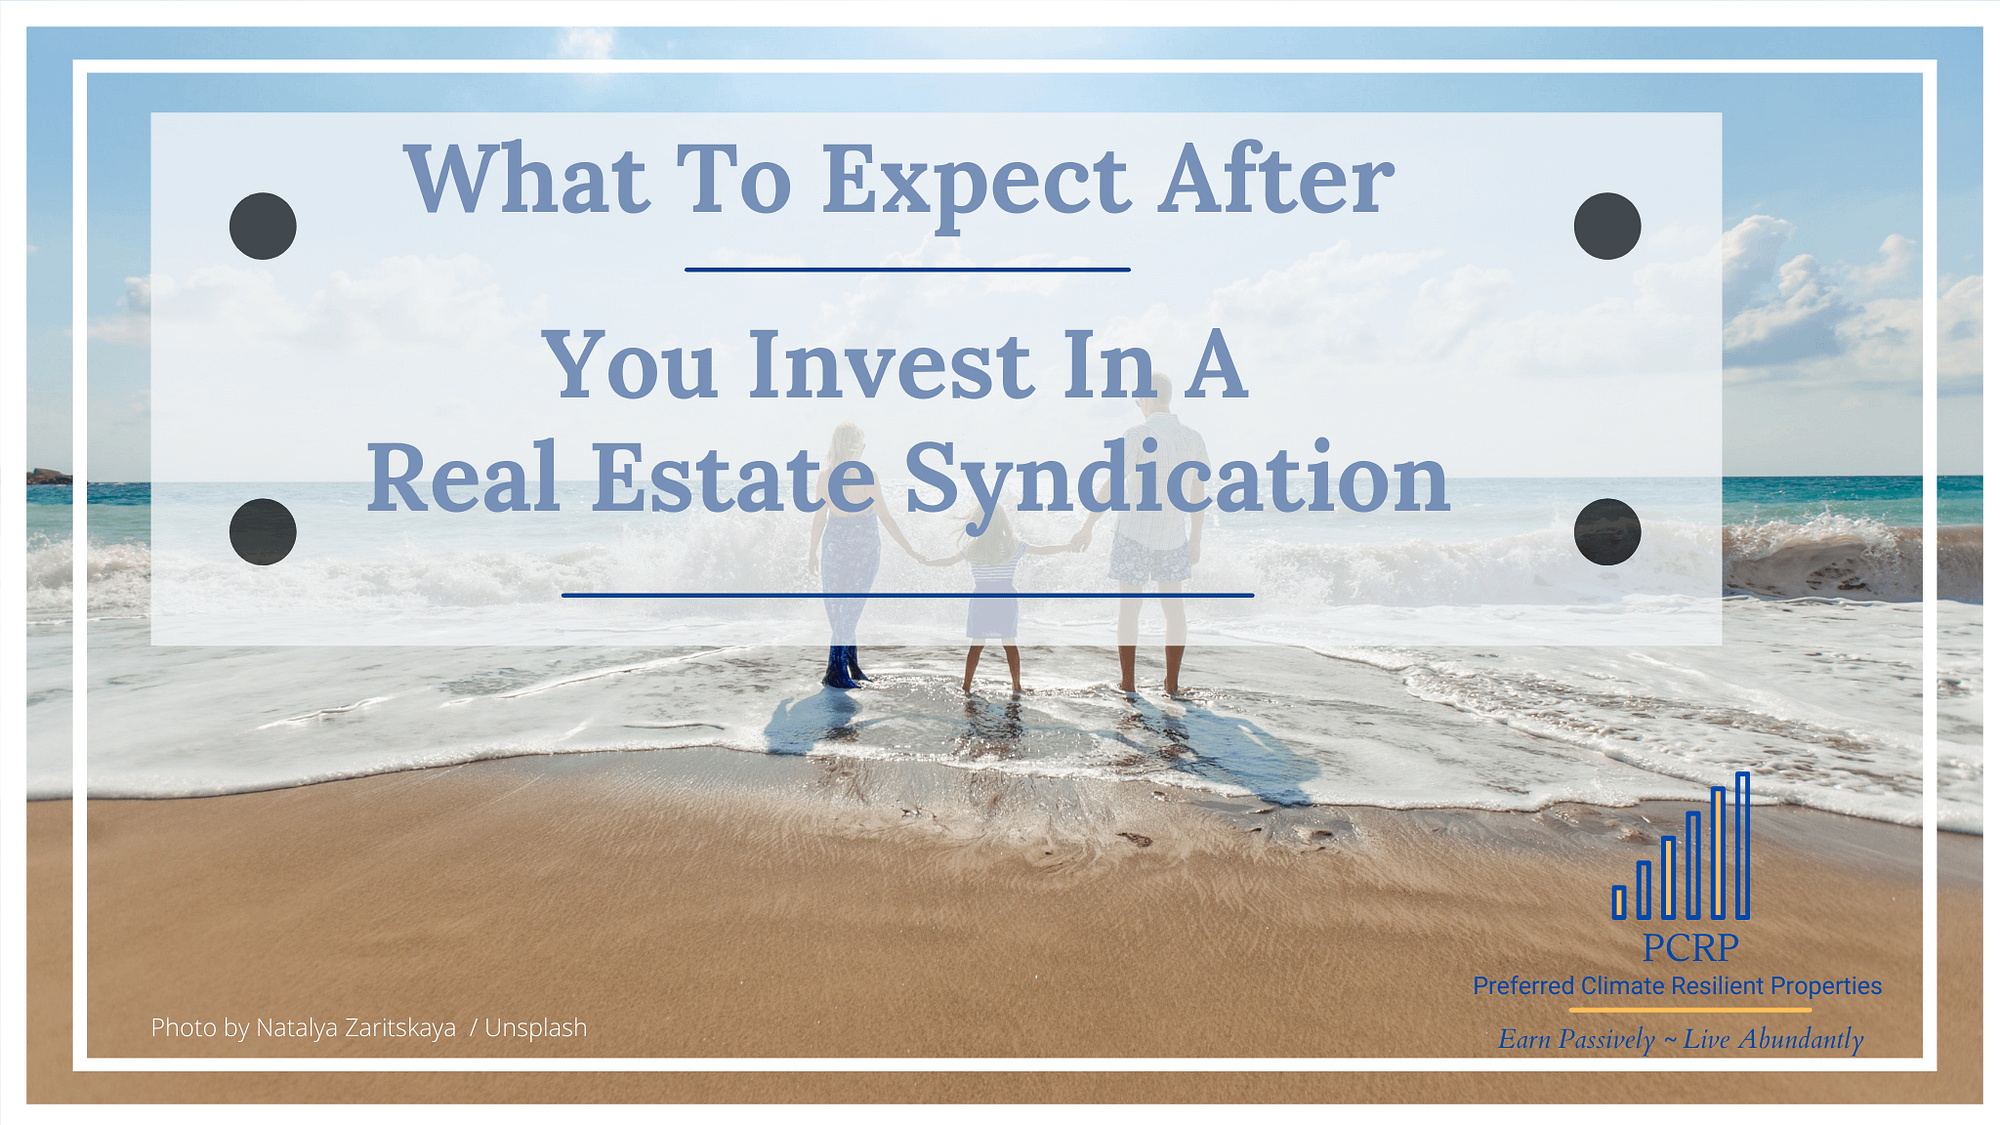 What You Can Expect After Investing In A Real Estate Syndication